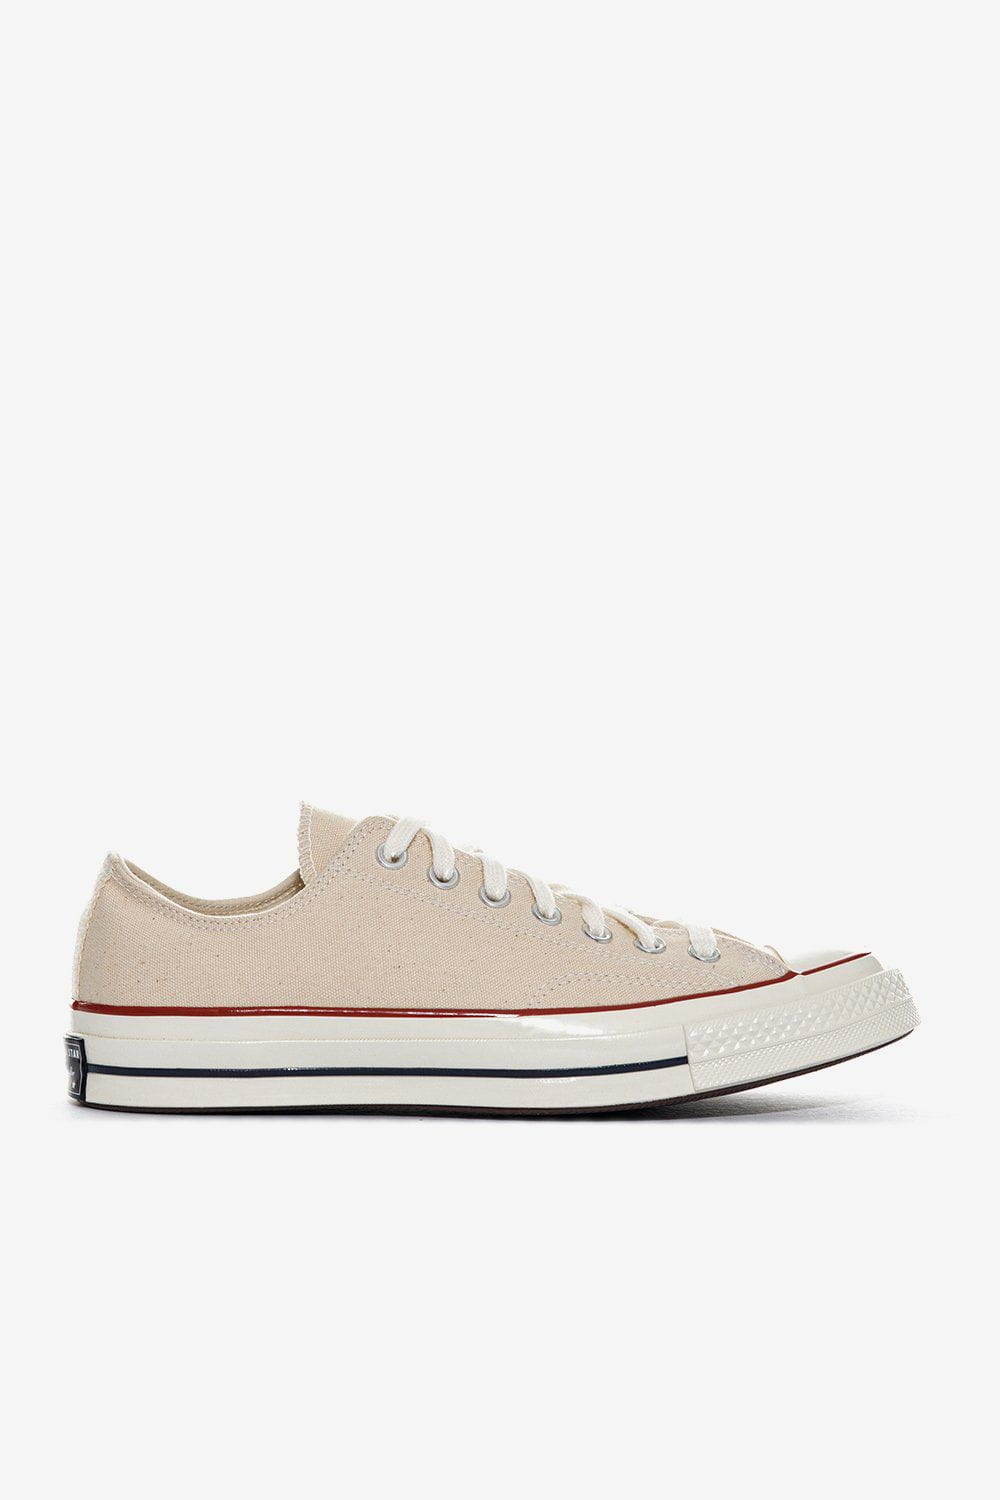 Hueco jardín Bigote Converse Chuck Taylor 70 Ox Parchment | Commonwealth Philippines –  Commonwealth Philippines | For The Greater Good